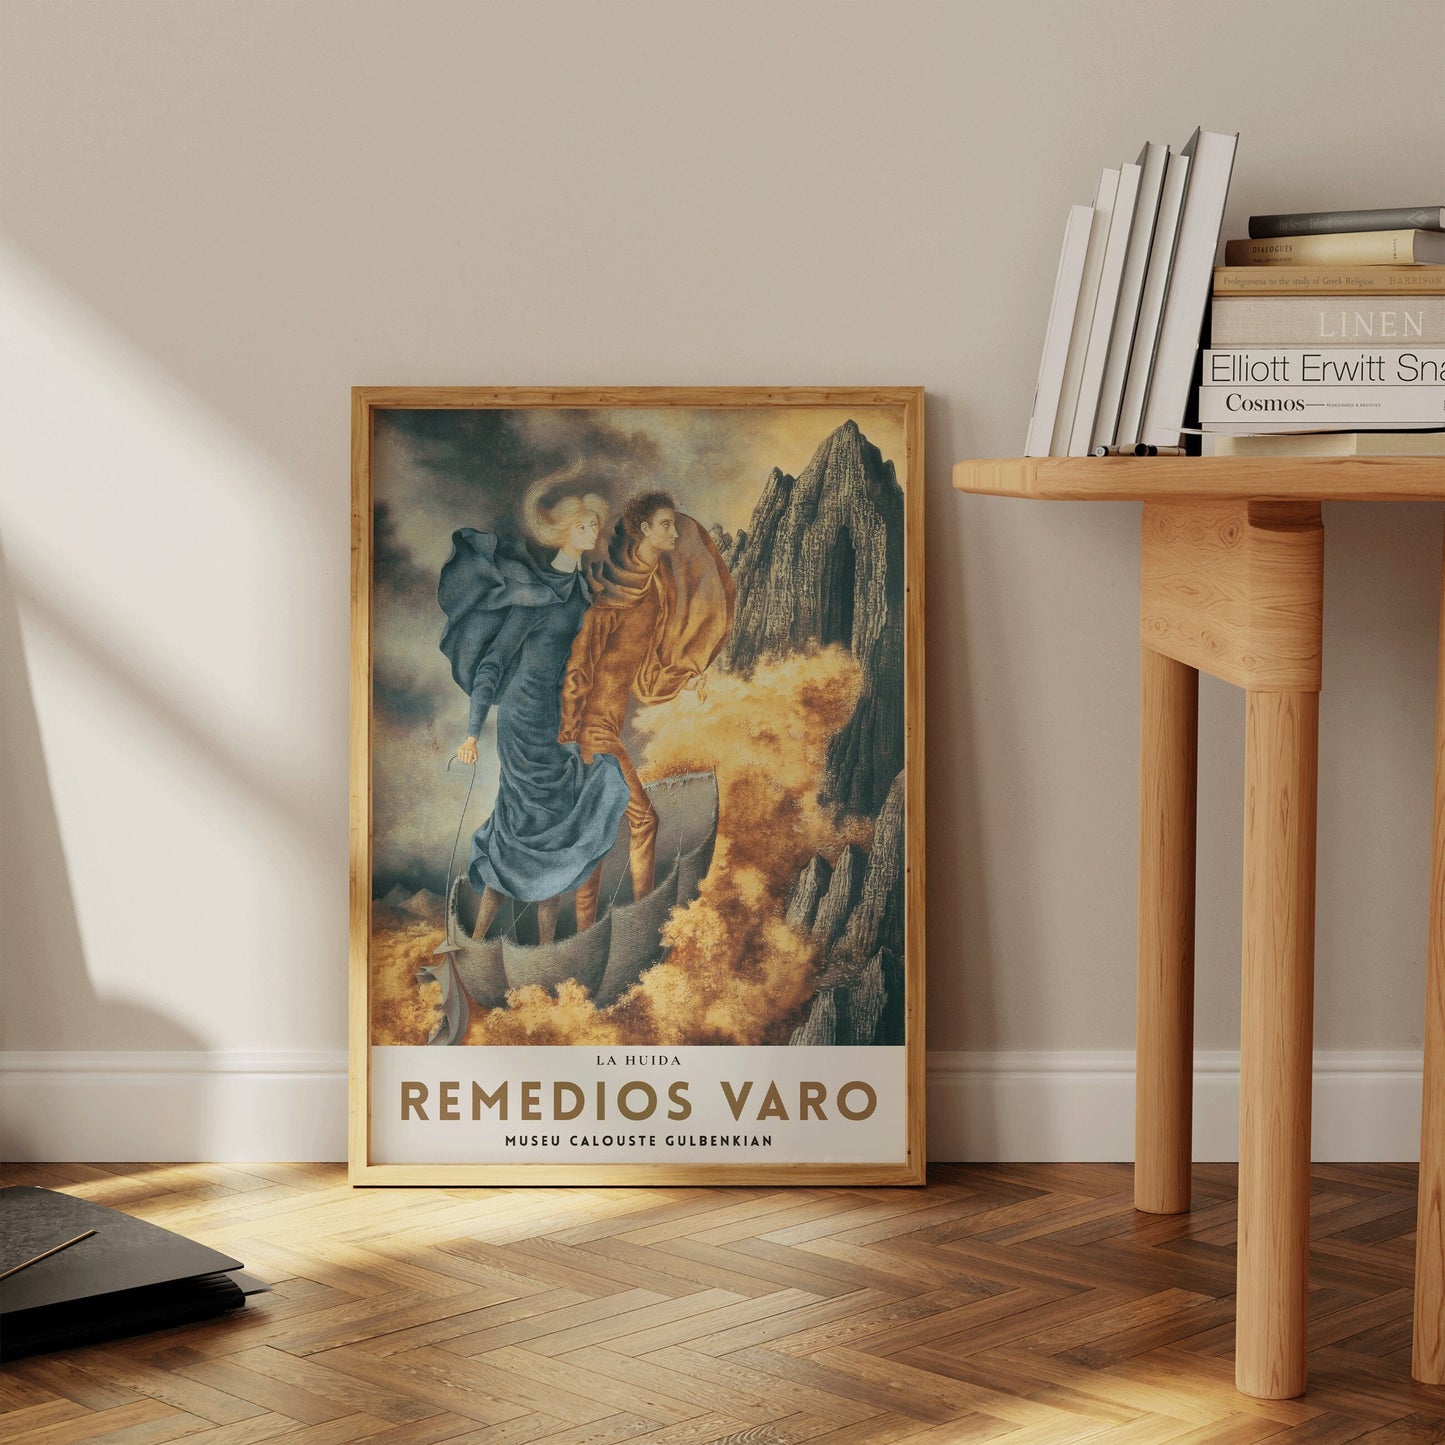 Remedios Varo The Flight Fine Surreal Art Famous Mexican Iconic Painting Vintage Ready to hang Framed Home Office Decor Print Gift Idea